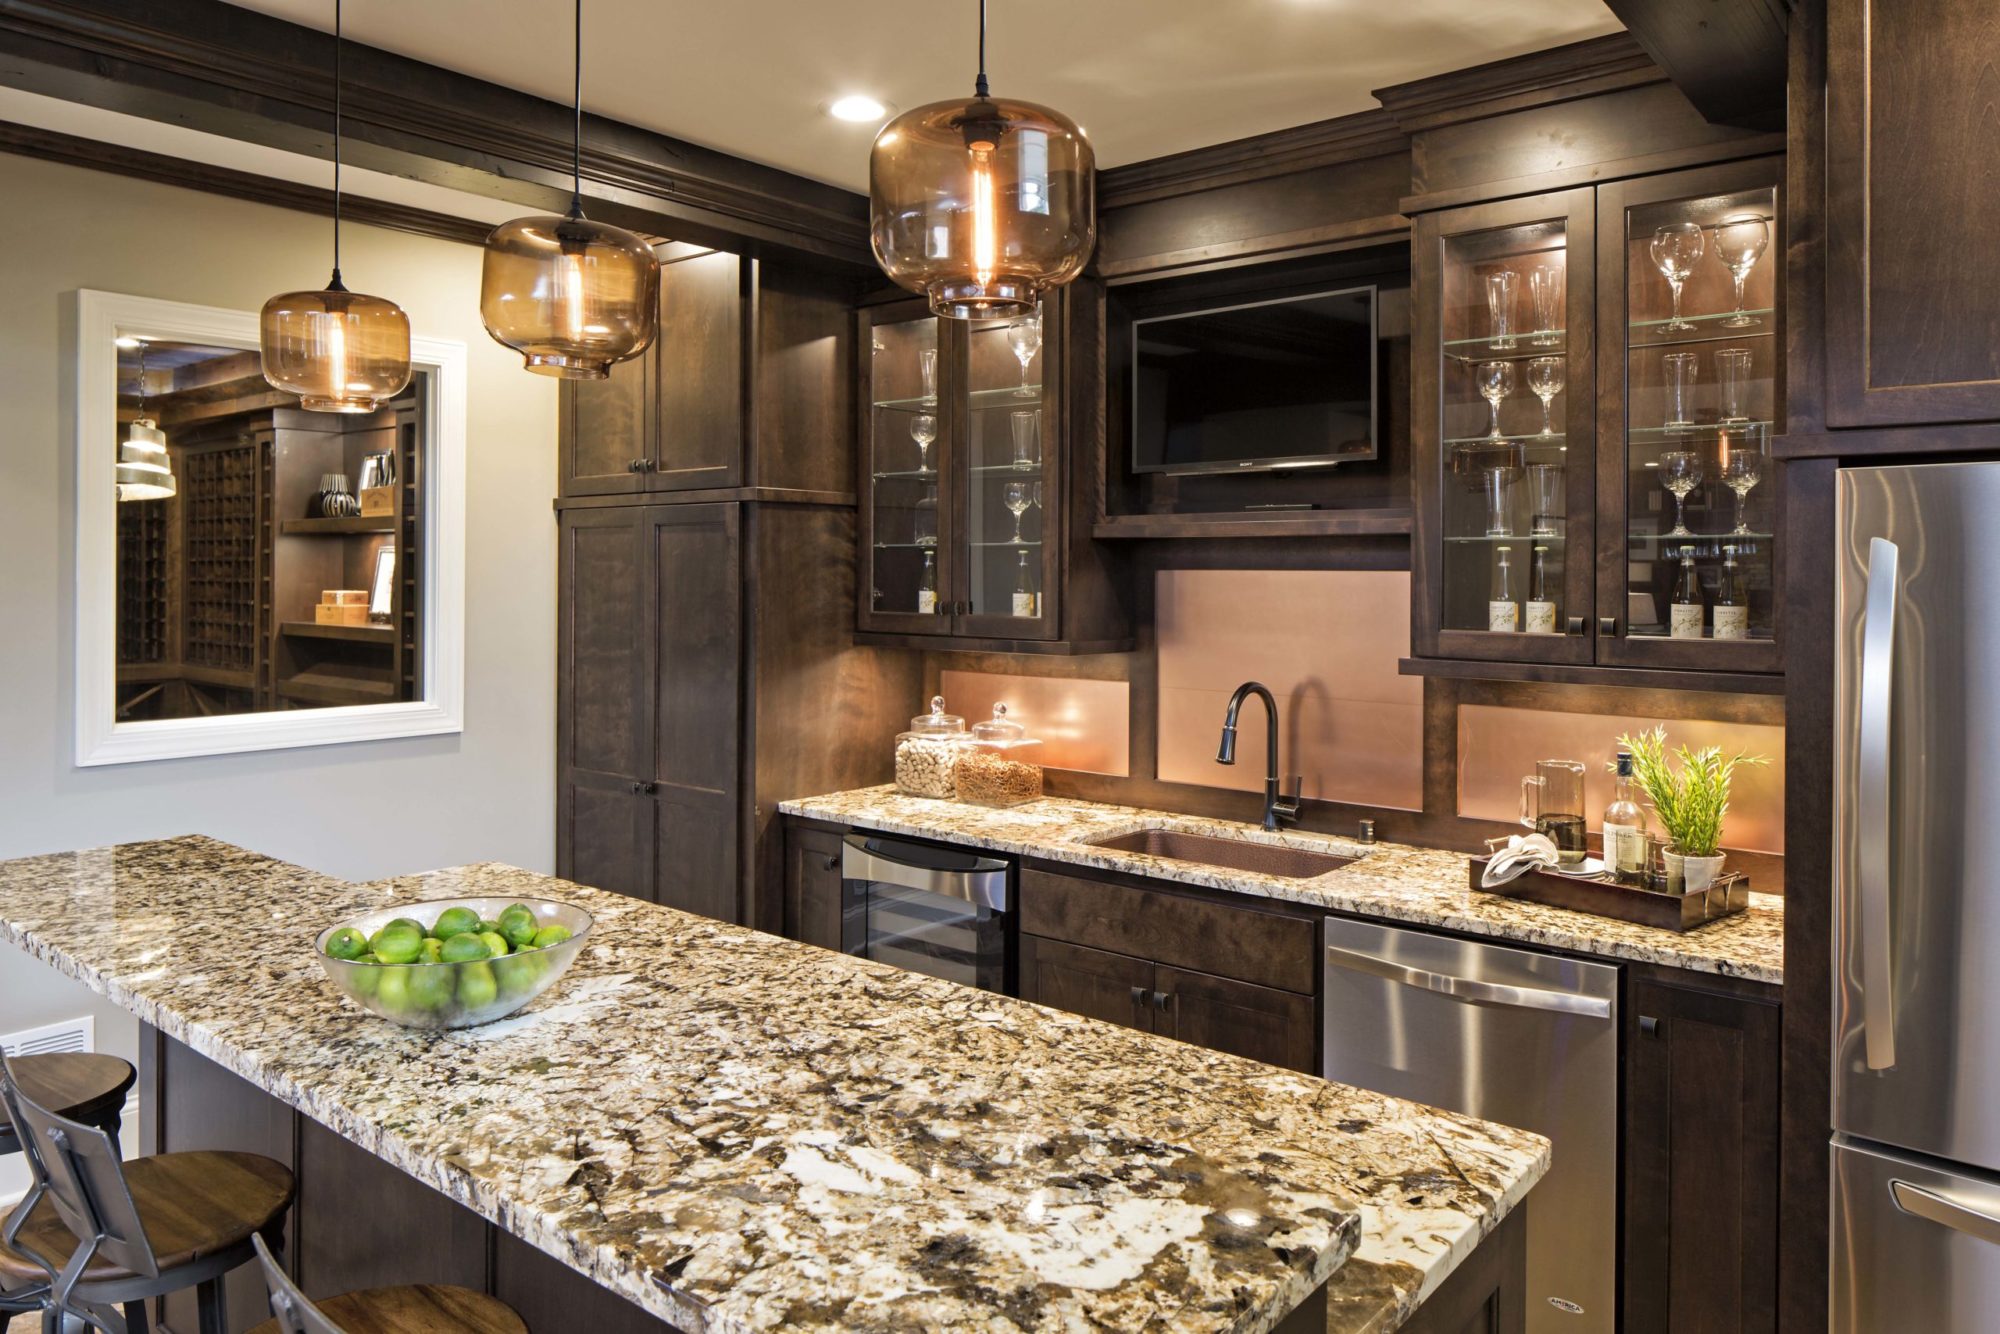 An Edina kitchen remodel with granite counter tops and stainless steel appliances.